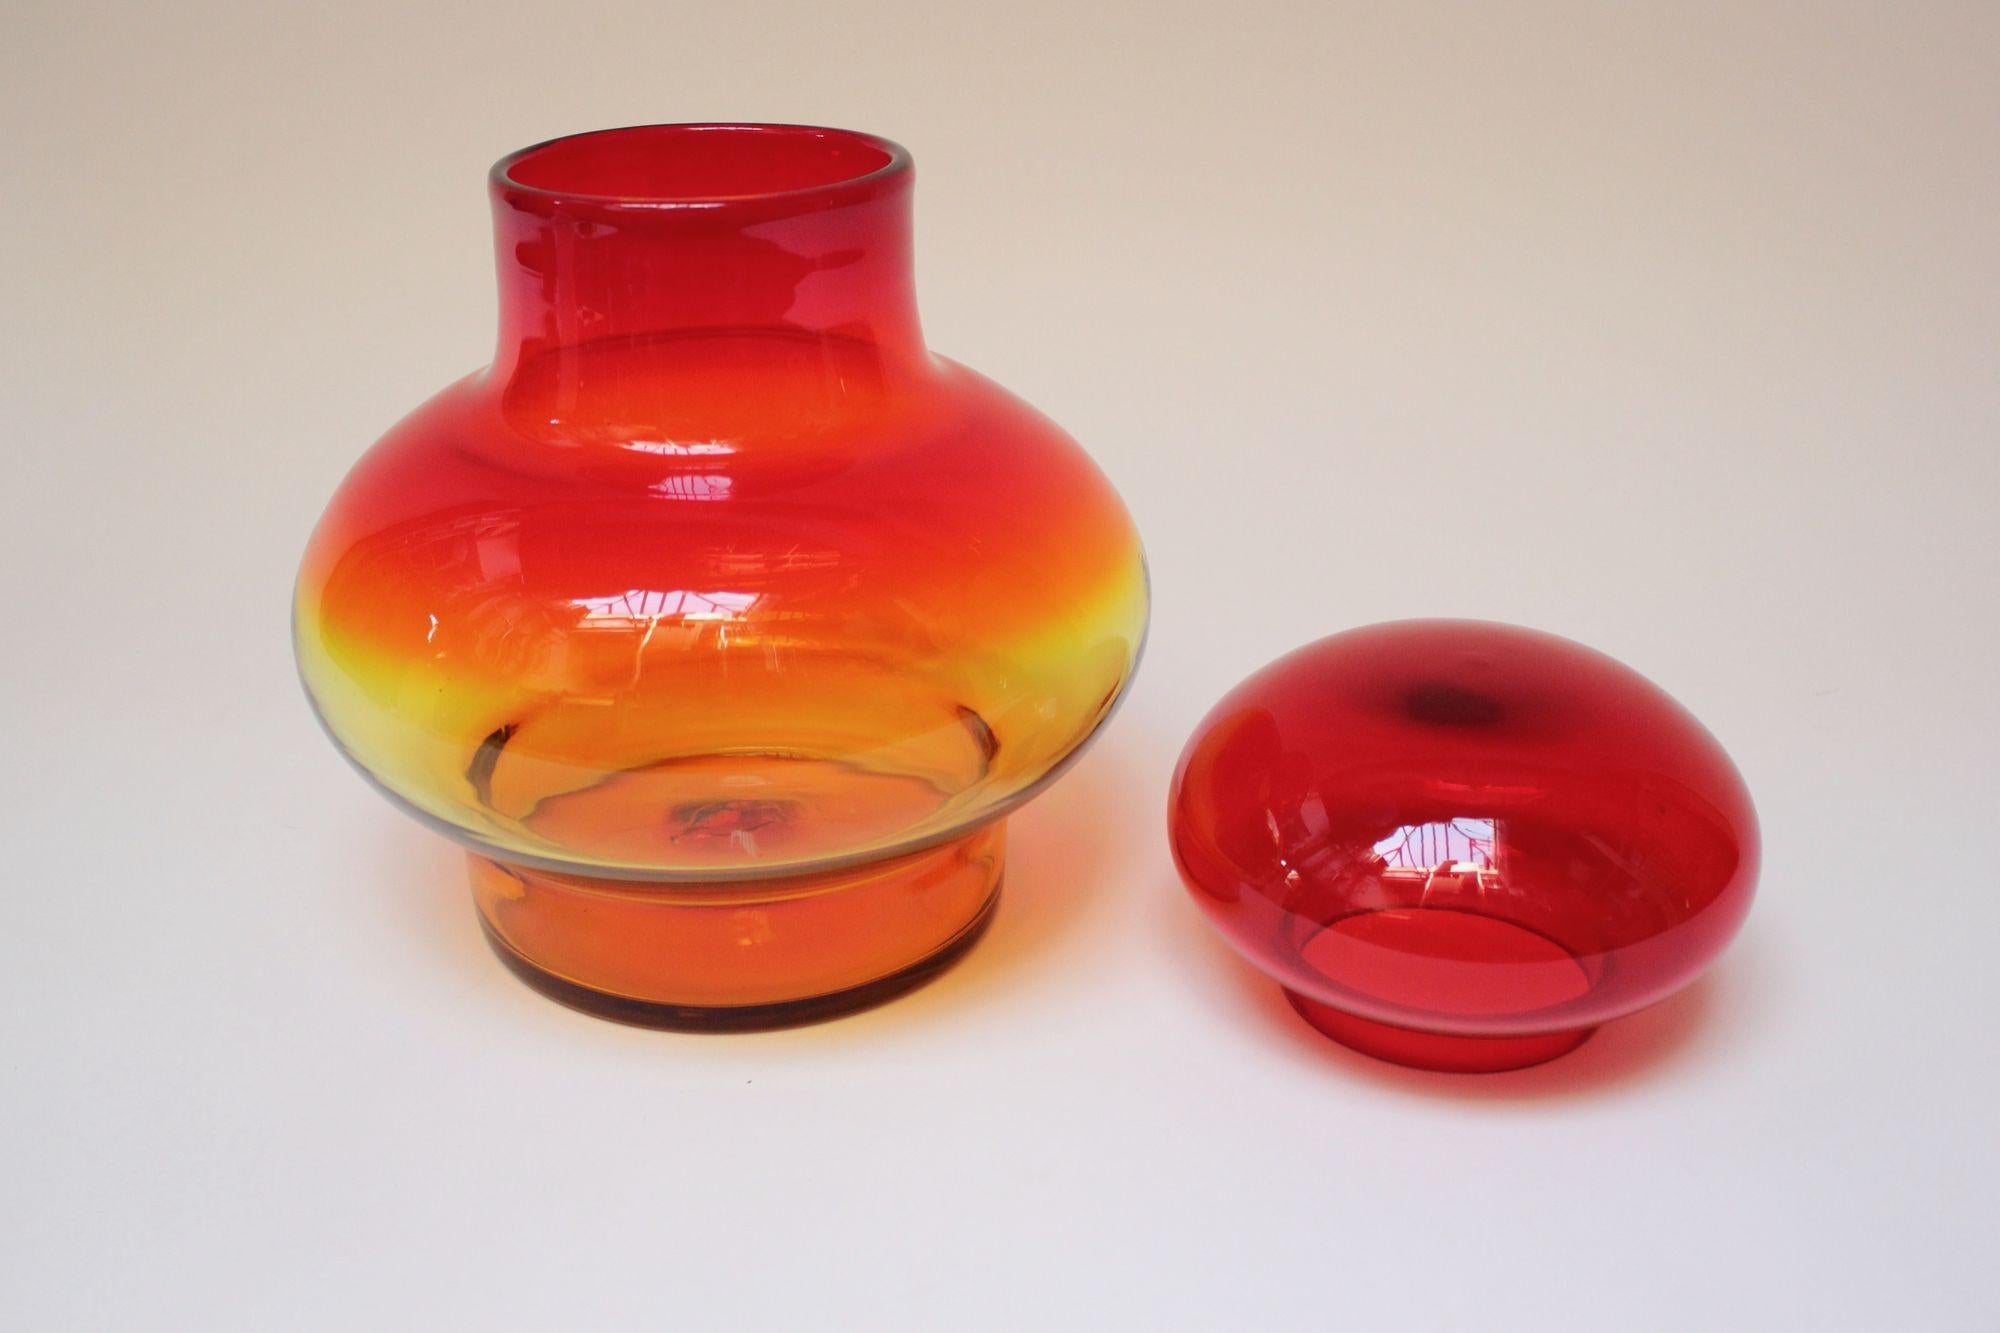 Large blown glass amberina/tangerine lidded jar designed by John Nickerson for Blenko (model number 7328).
This model first appeared in the 1973 Blenko catalog and remained in production for only two years. Scarcely seen example including the